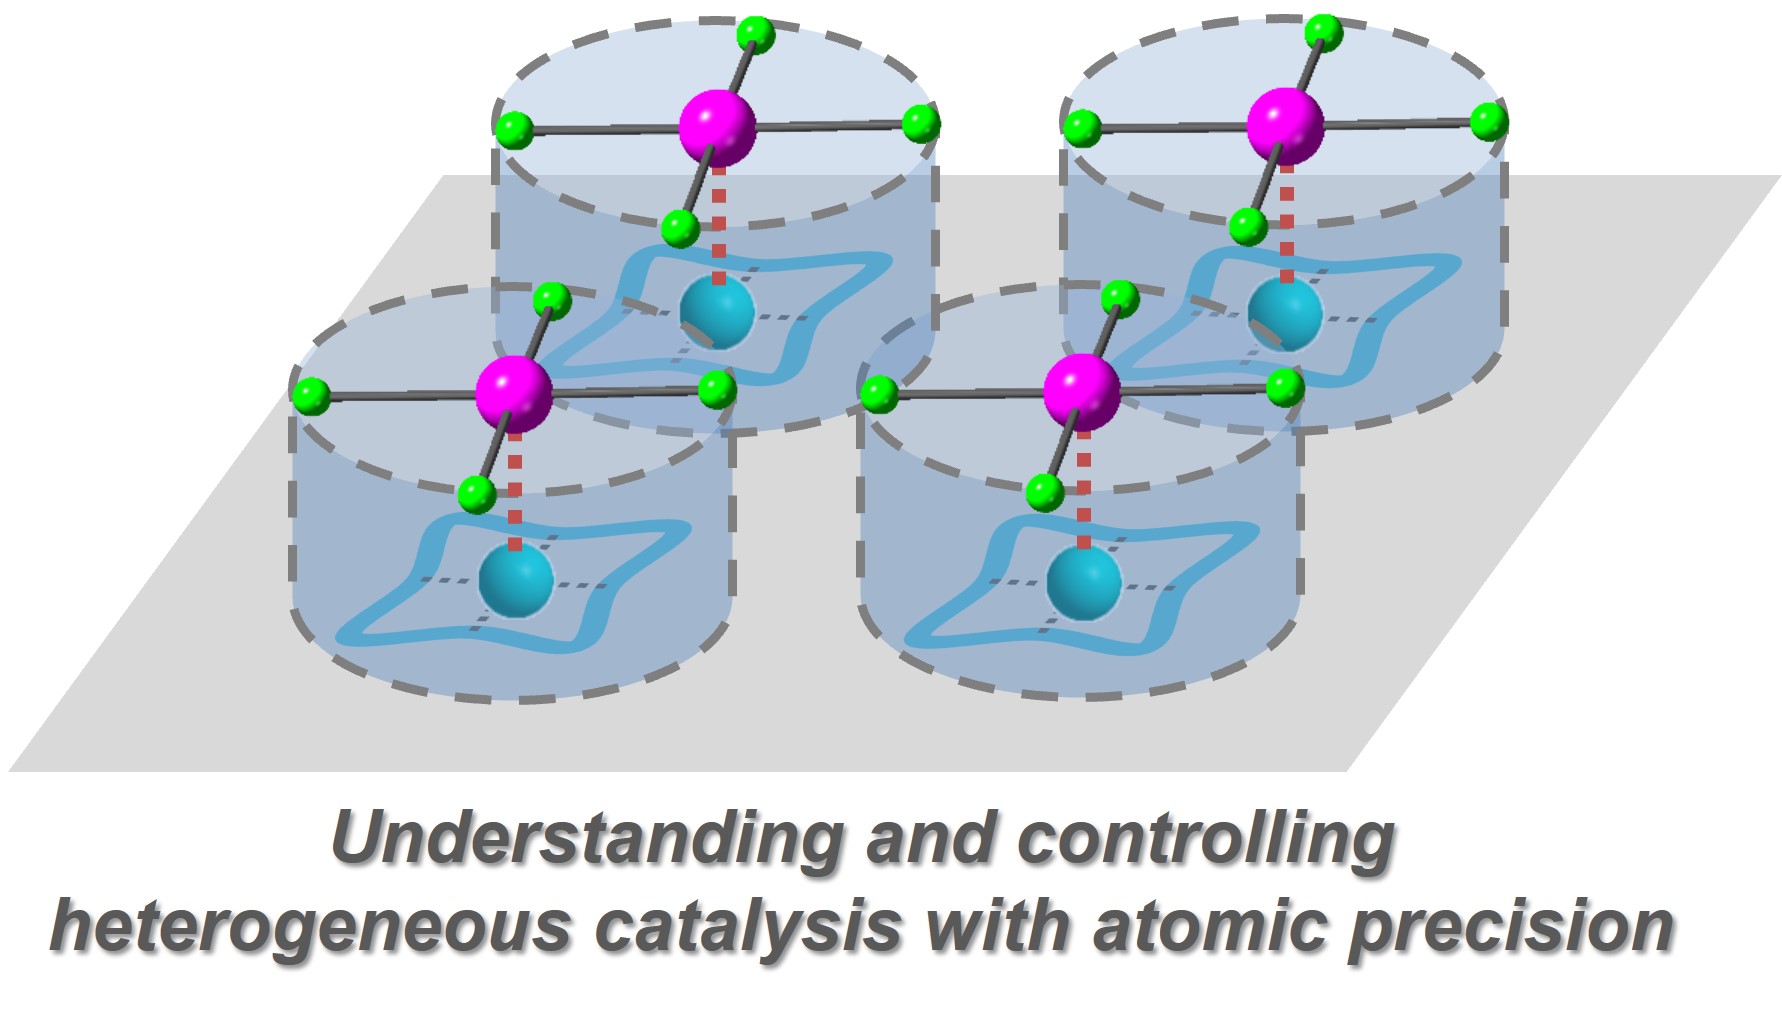 Understanding and controlling heterogeneous catalysis with atomic precision